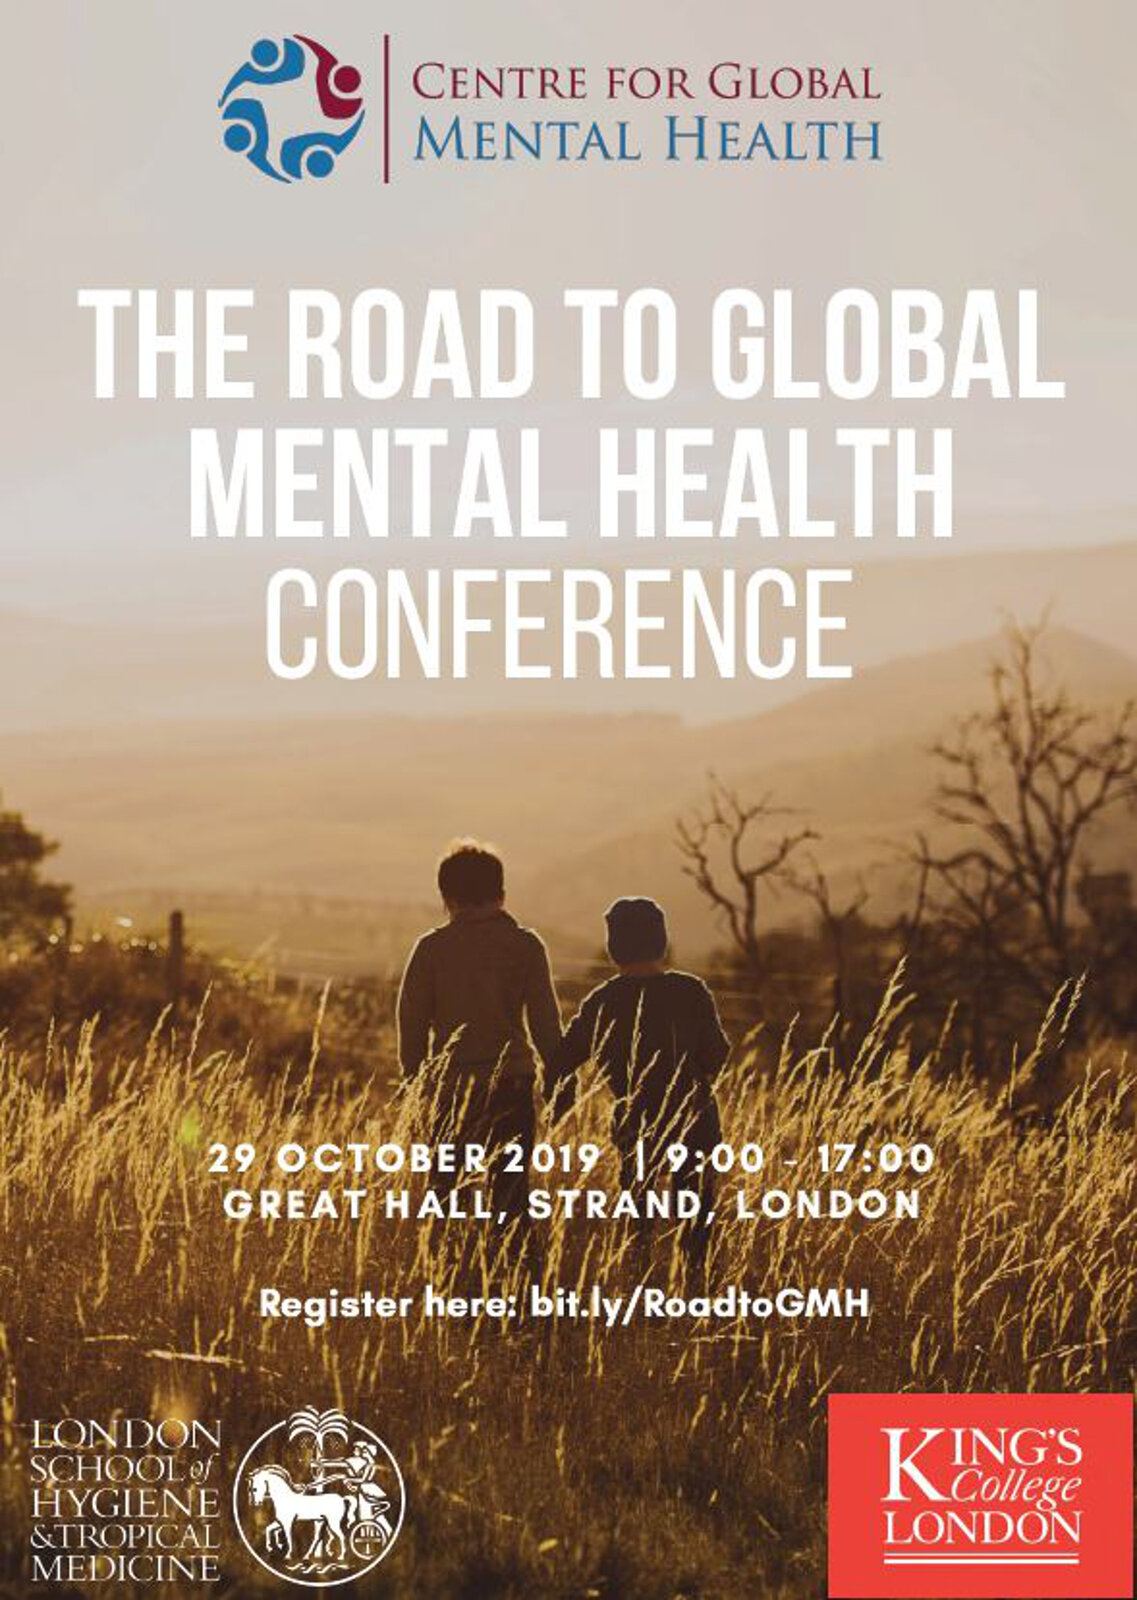 The Road to Global Mental Health Conference Centre for Global Mental Health